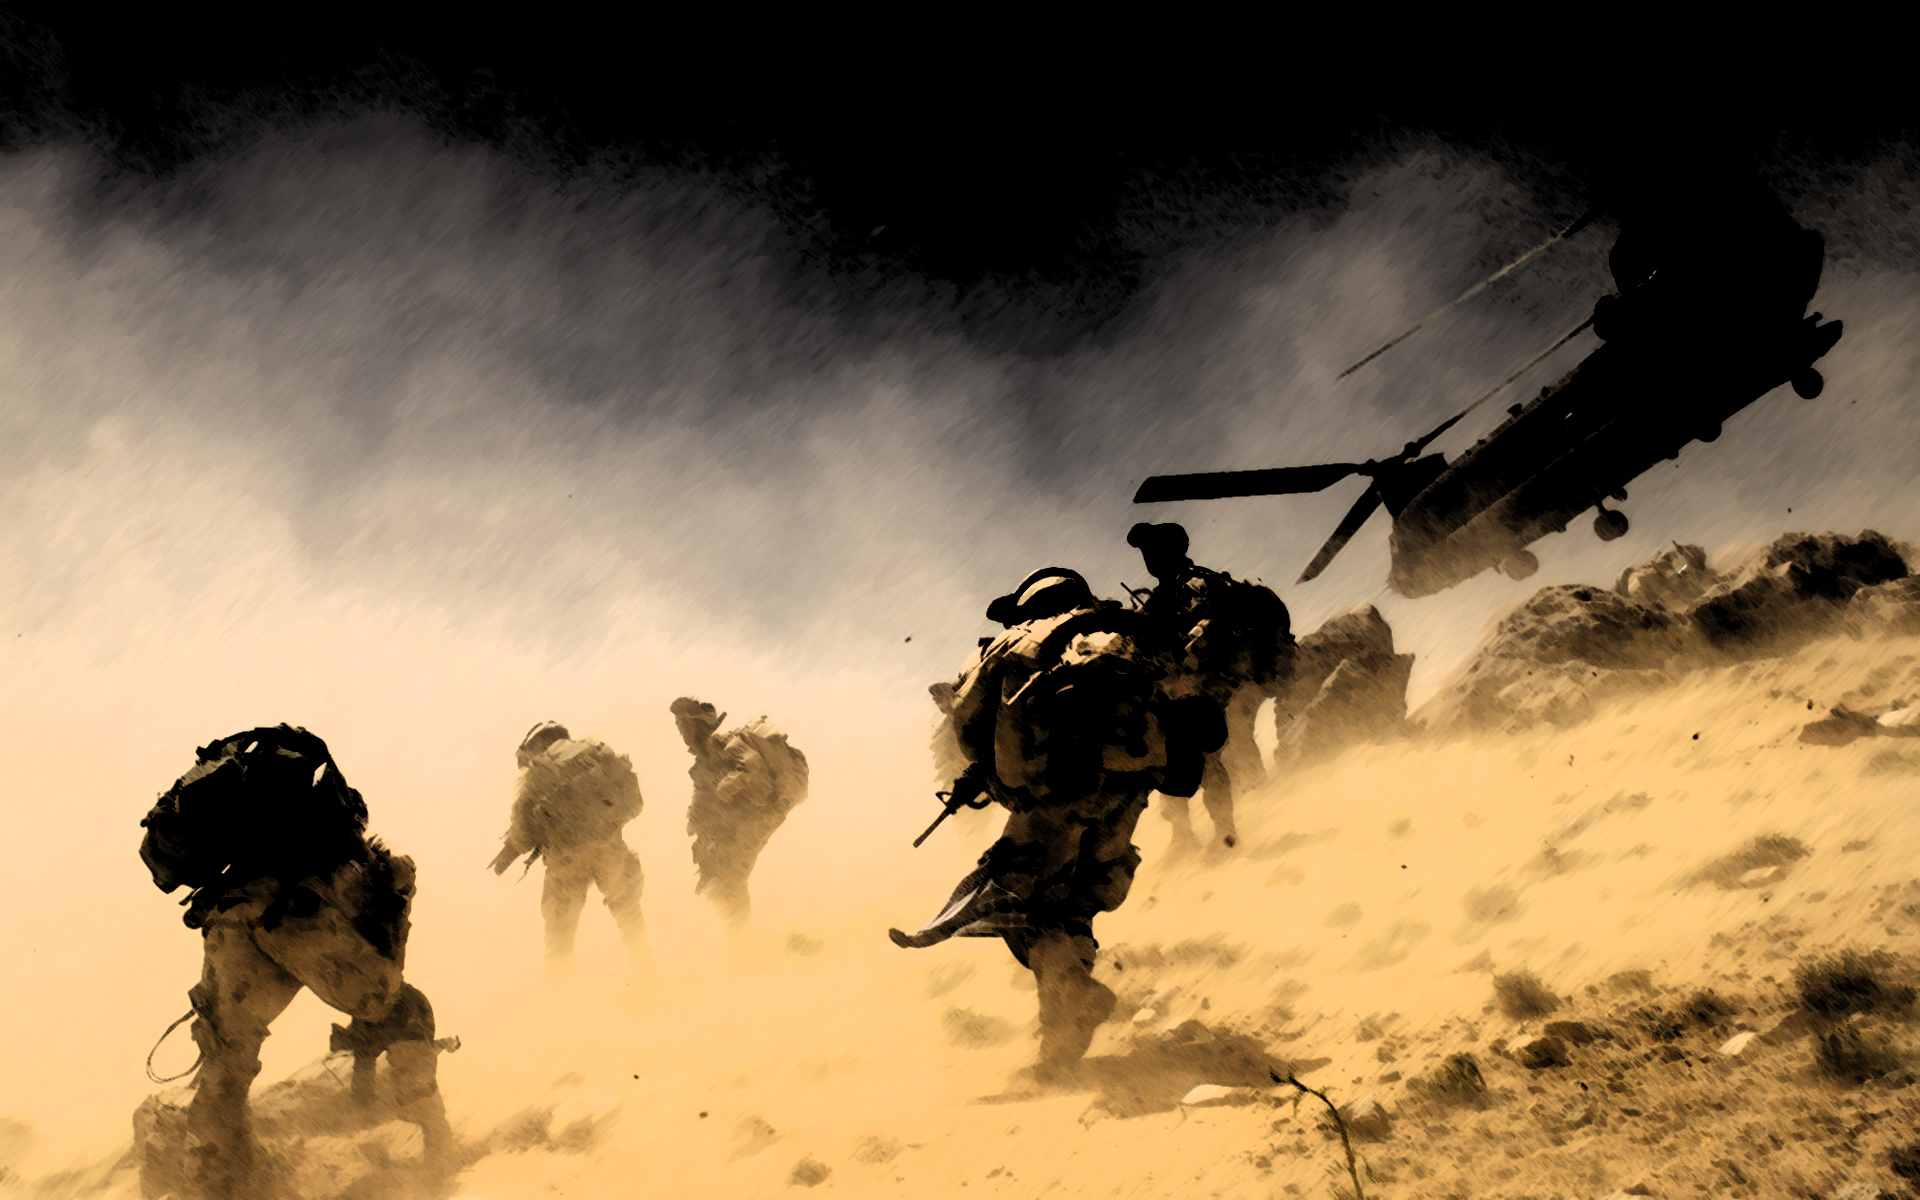 Army Wallpaper For Desktop Wallpapers, Backgrounds, Images, Art